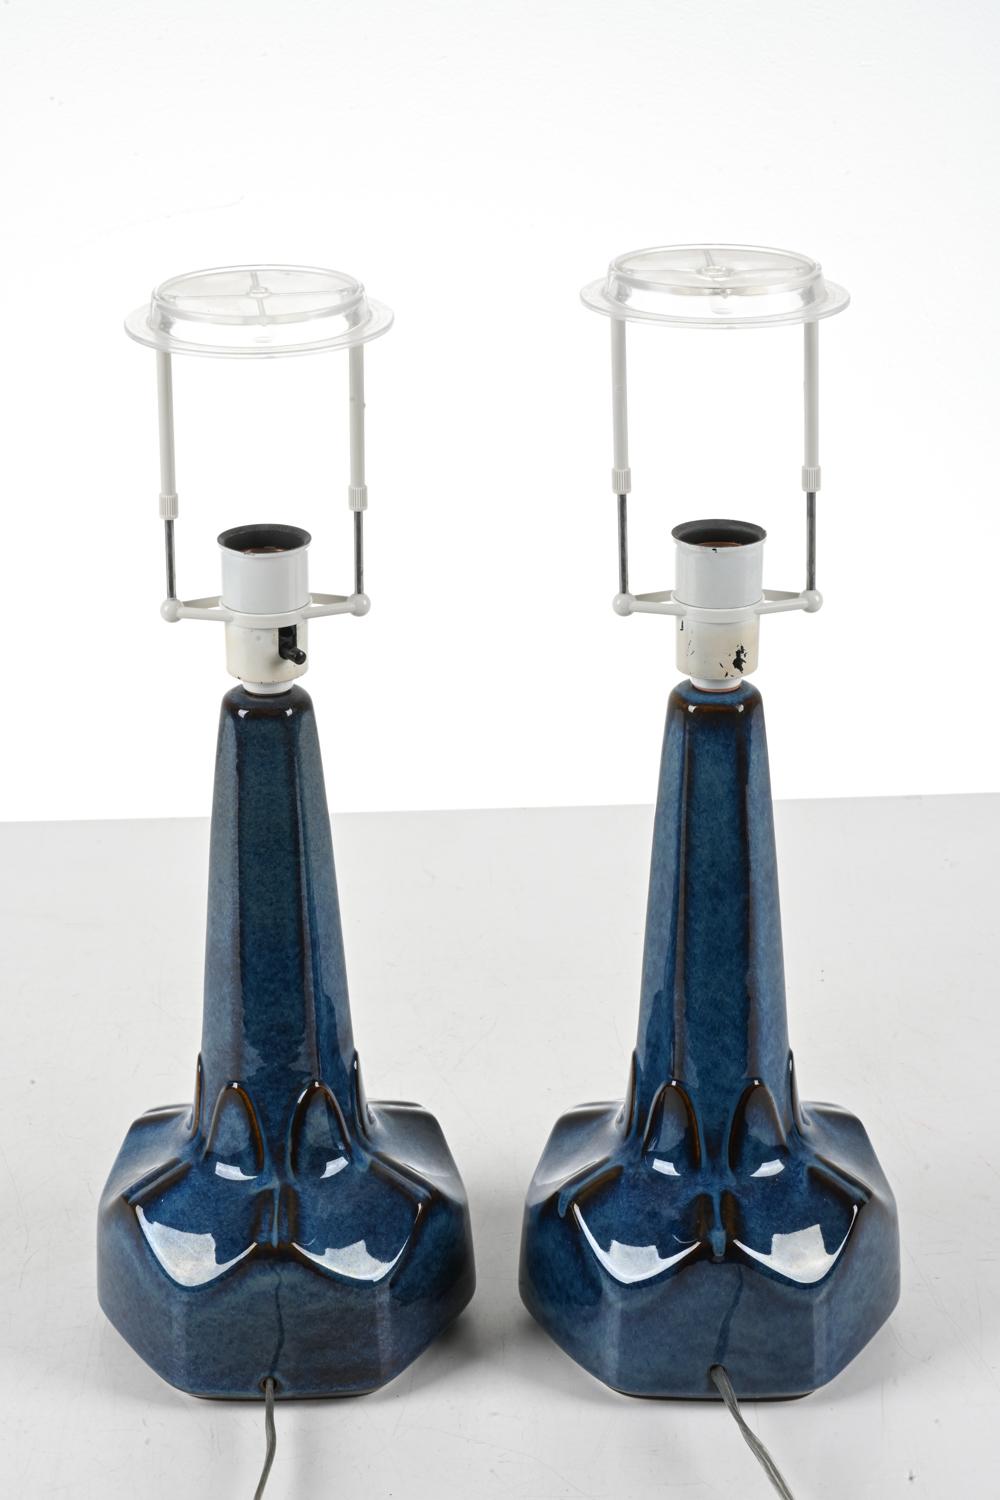 Pair Søholm Table Lamps, Dark Blue Stoneware, Denmark, 1960s In Fair Condition For Sale In Norwalk, CT